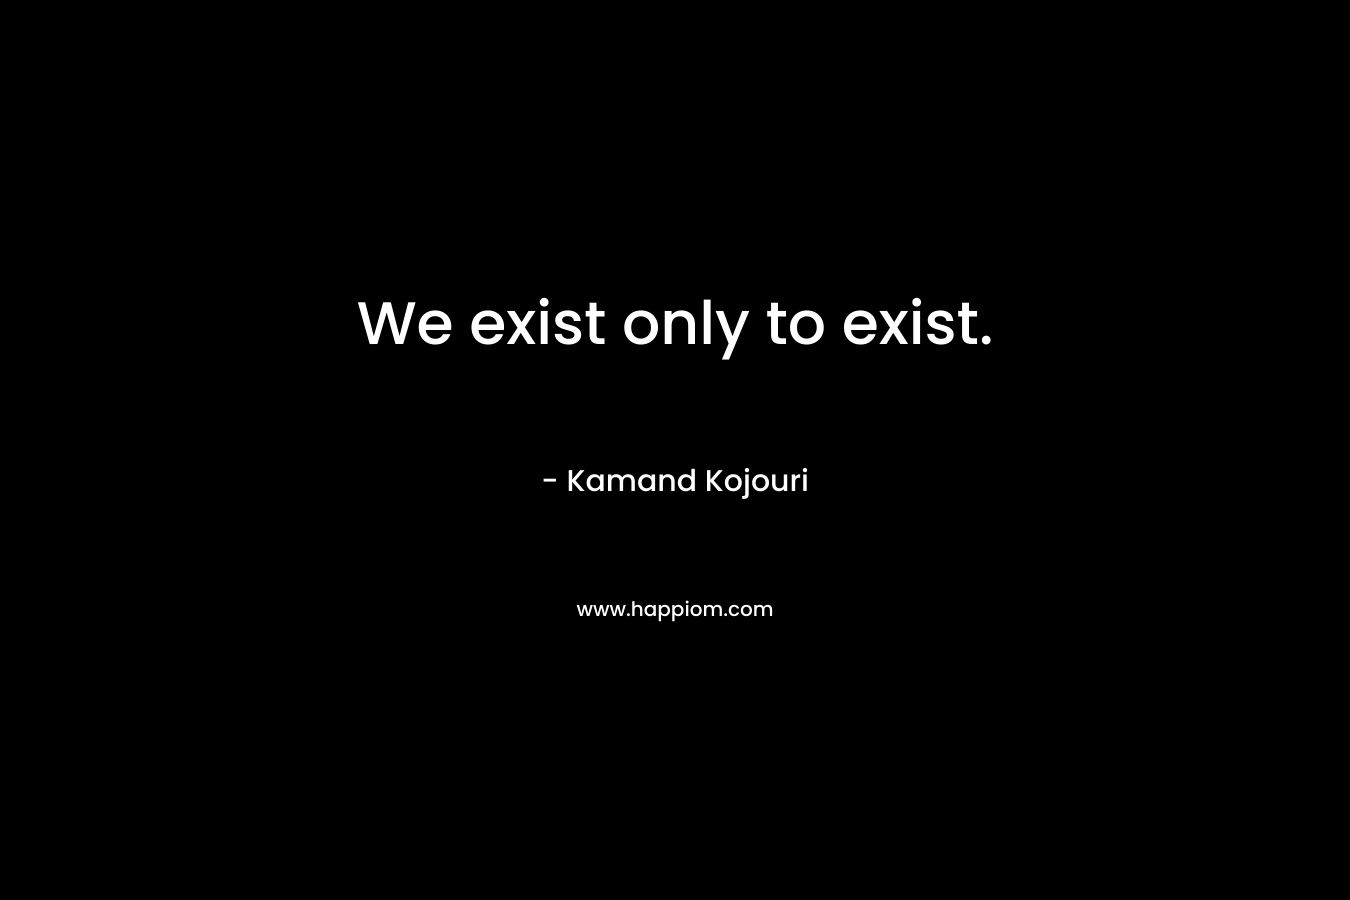 We exist only to exist.